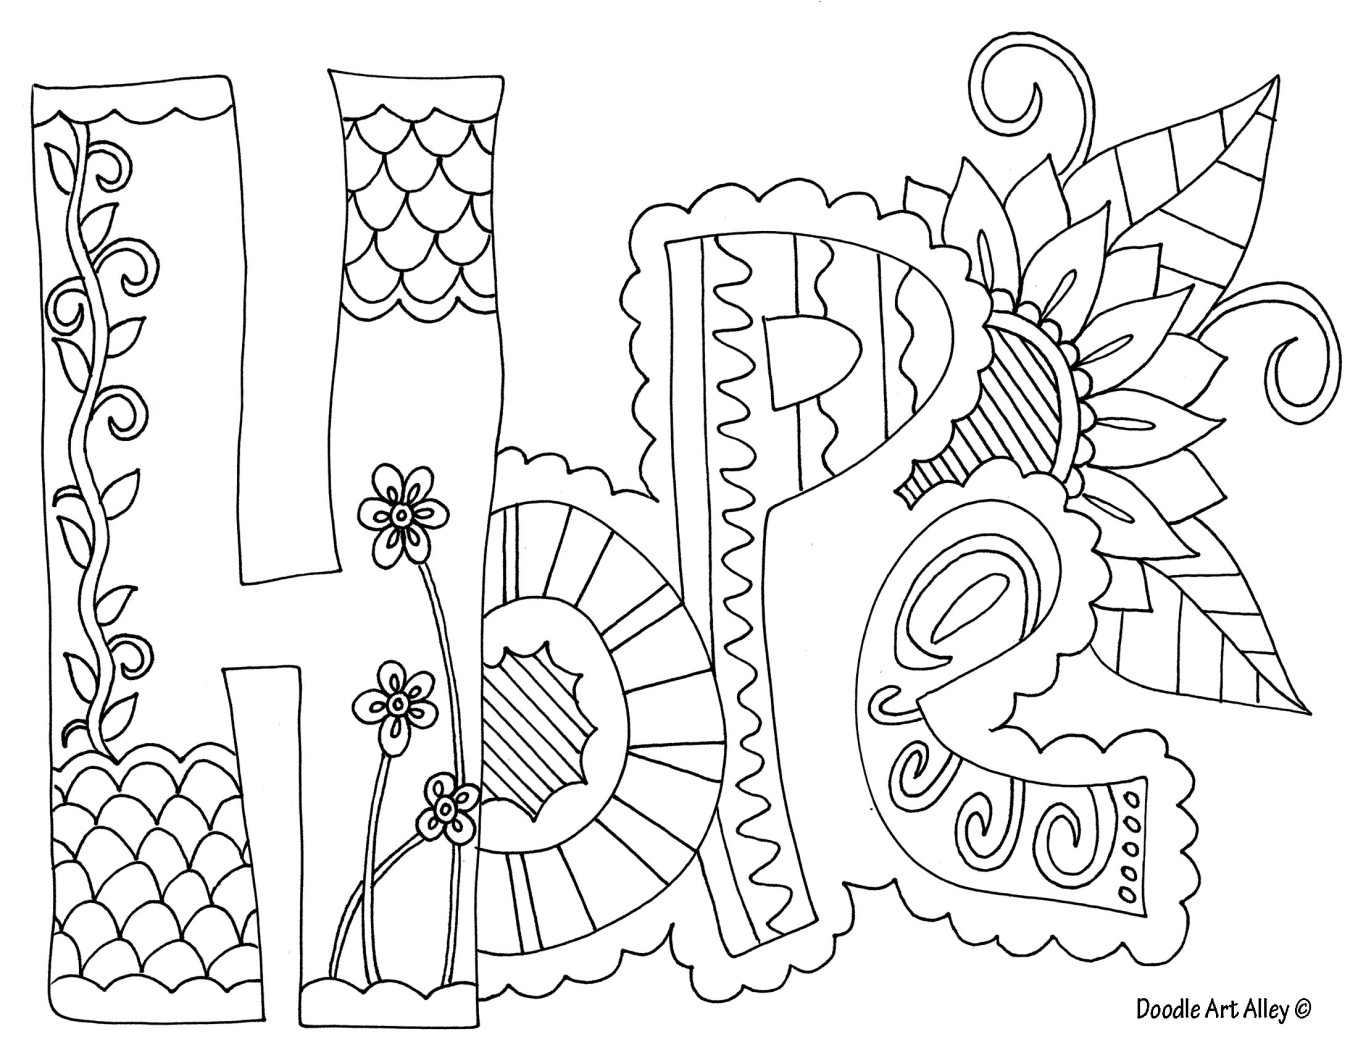 Printable Name Coloring Pages
 Hope coloring page to encourage discussion in a creative